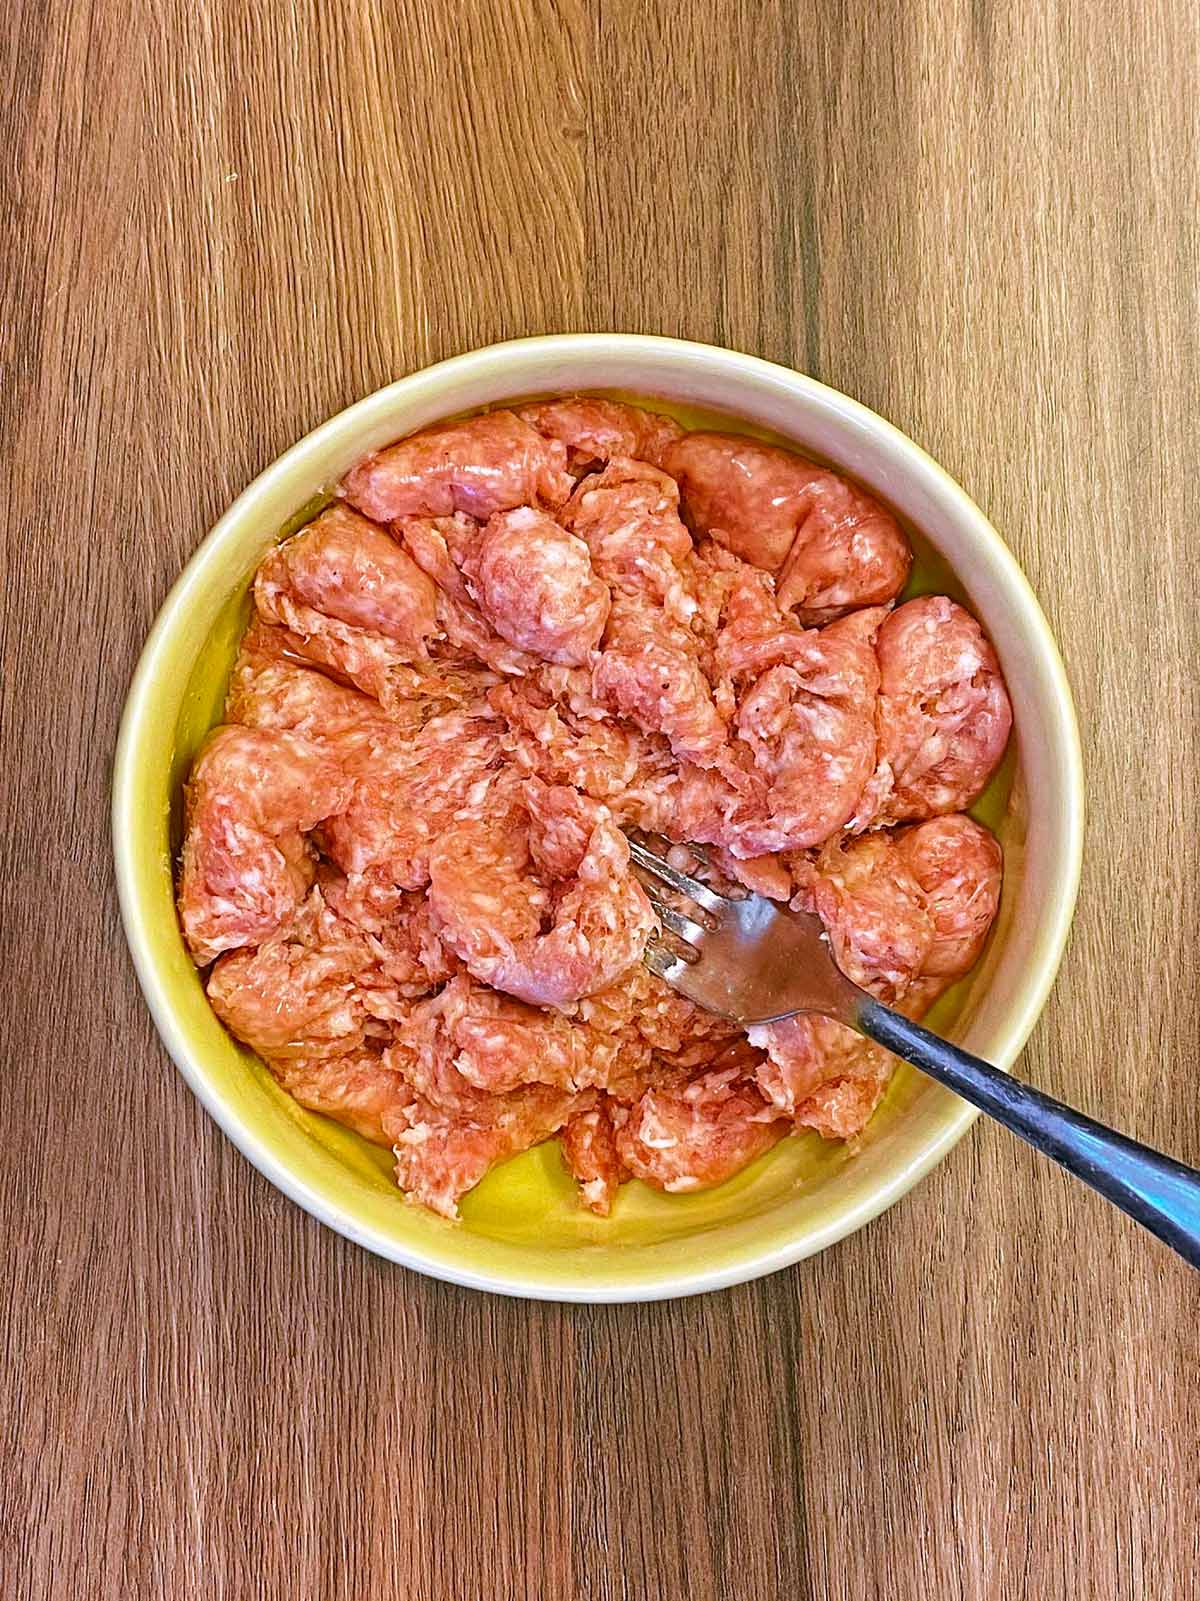 A bowl with mashed sausage meat in it.